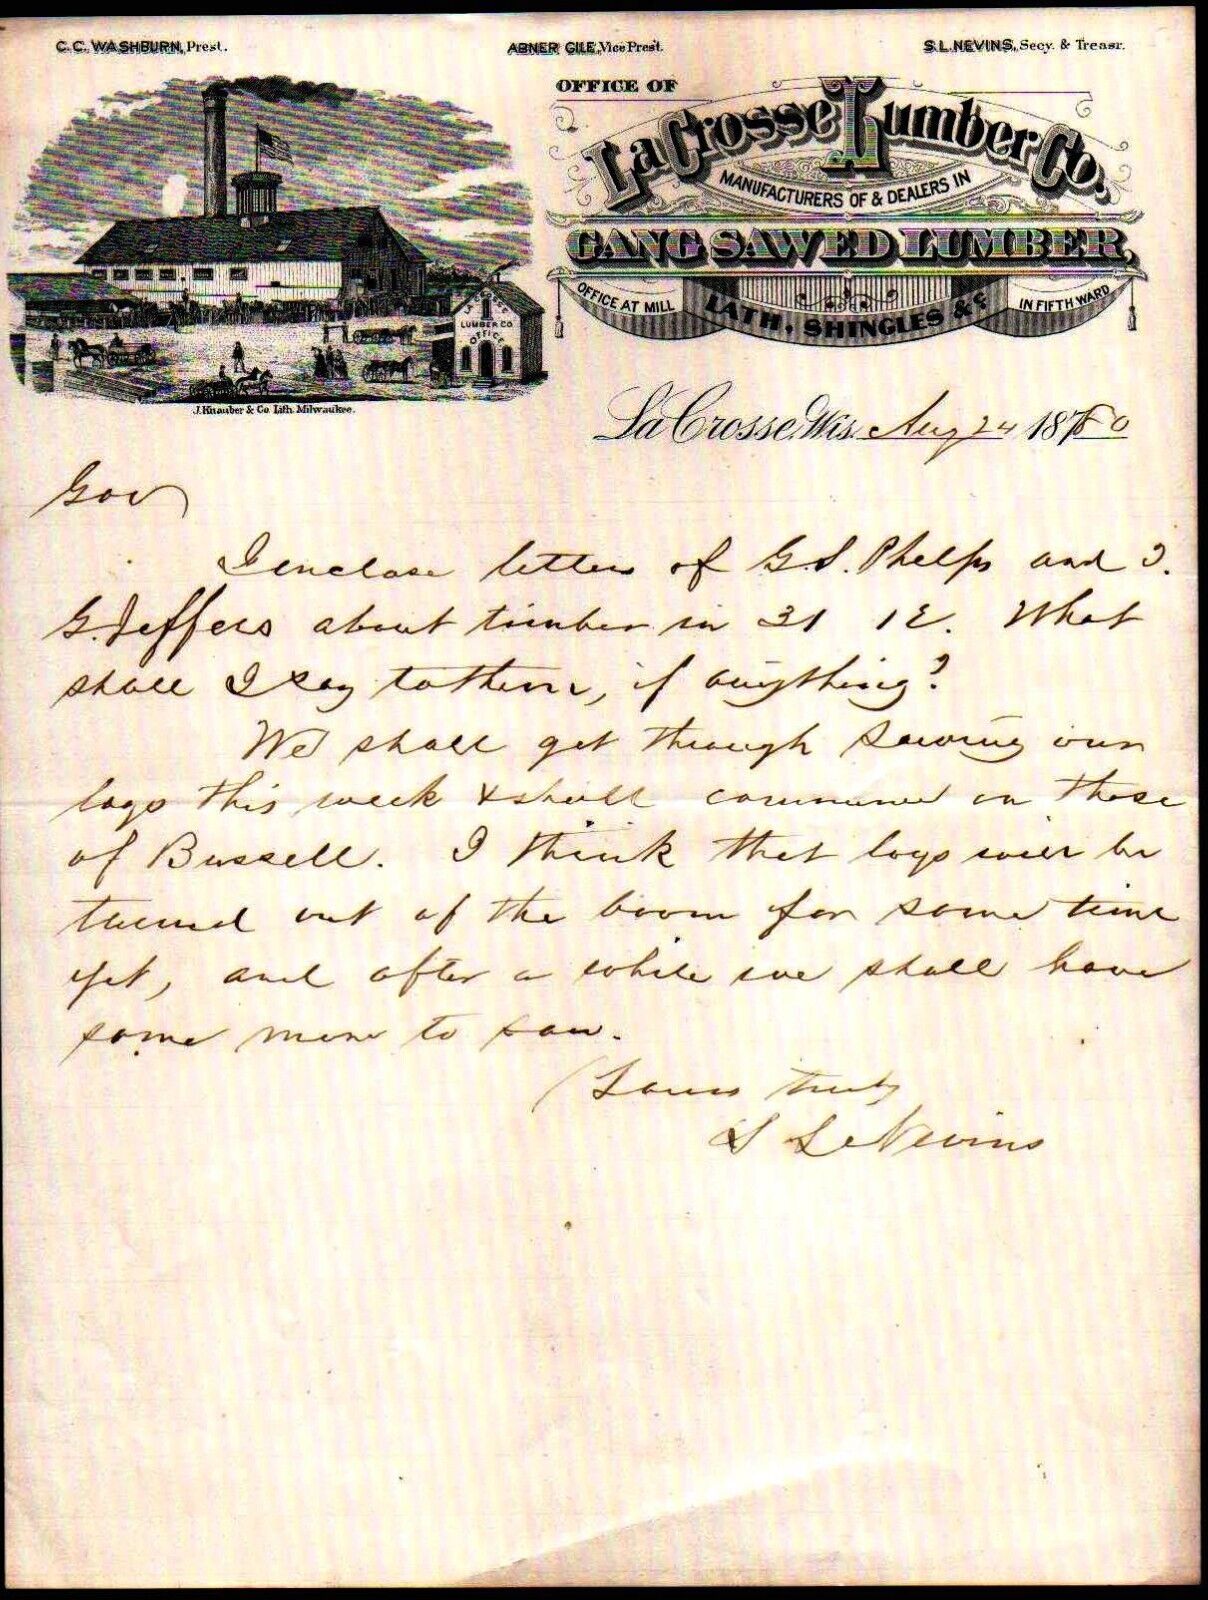 1880 Wi -  LaCrosse Lumber Co - to Governor - SUPERB - EX RARE Letter Head Bill